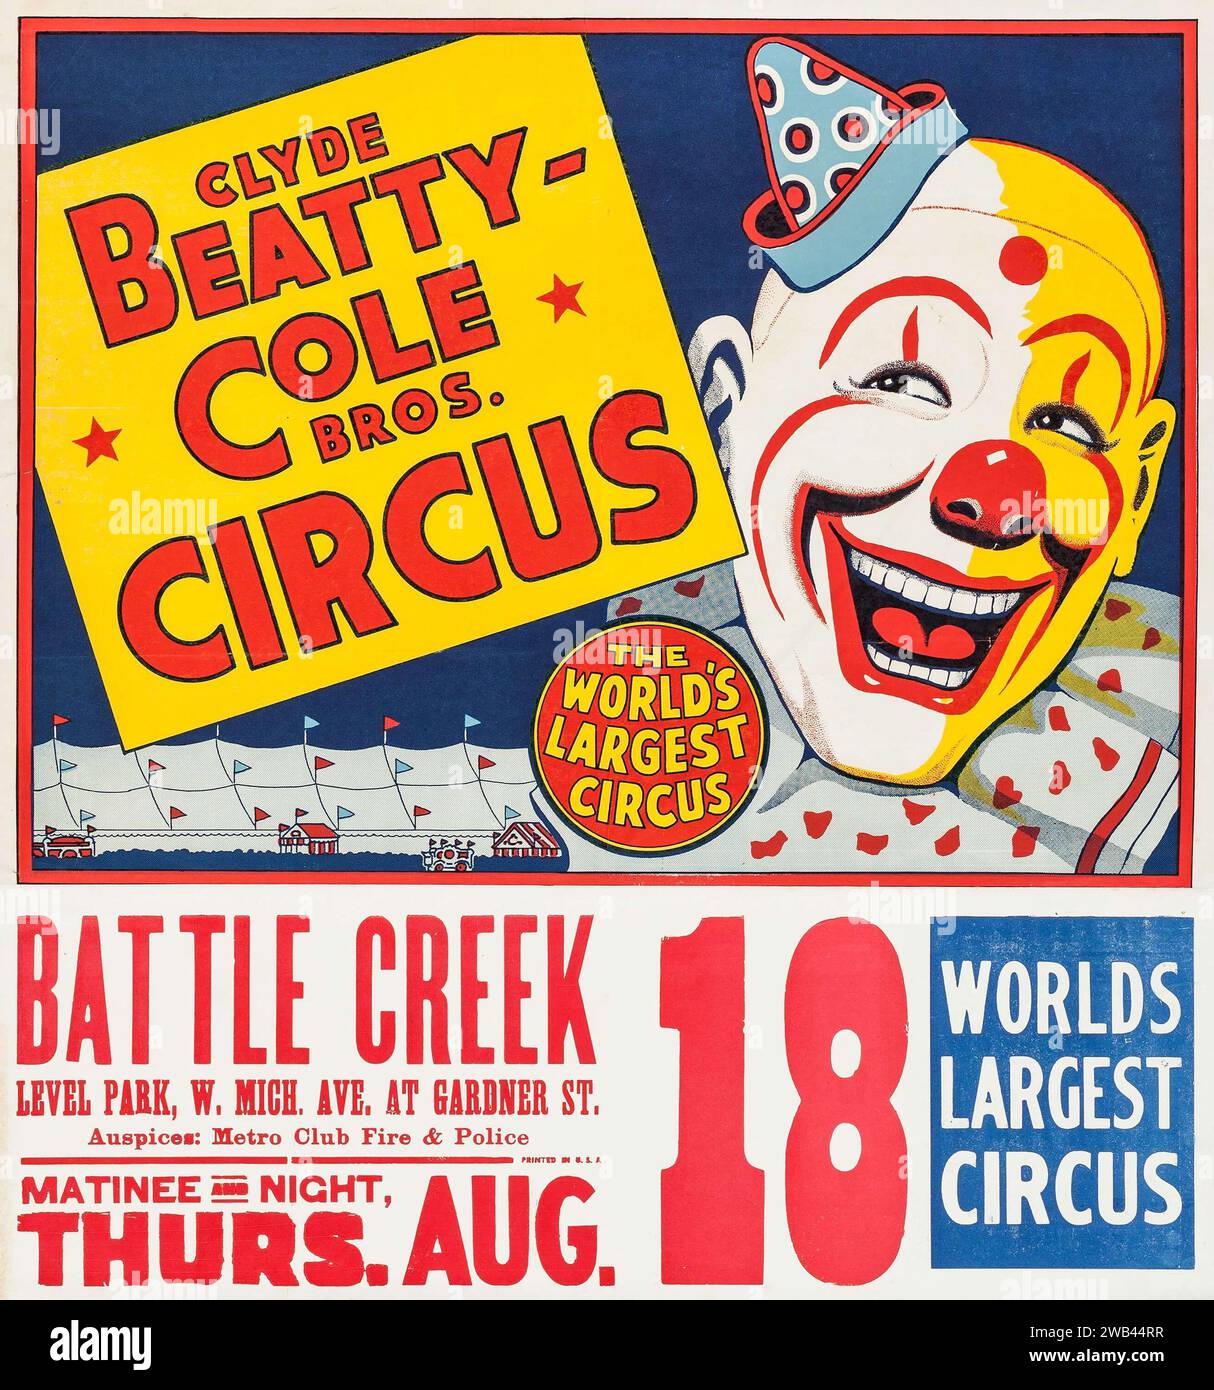 Circus Poster feat a clown (Clyde Beatty - Cole Brothers, c. 1958) Stock Photo